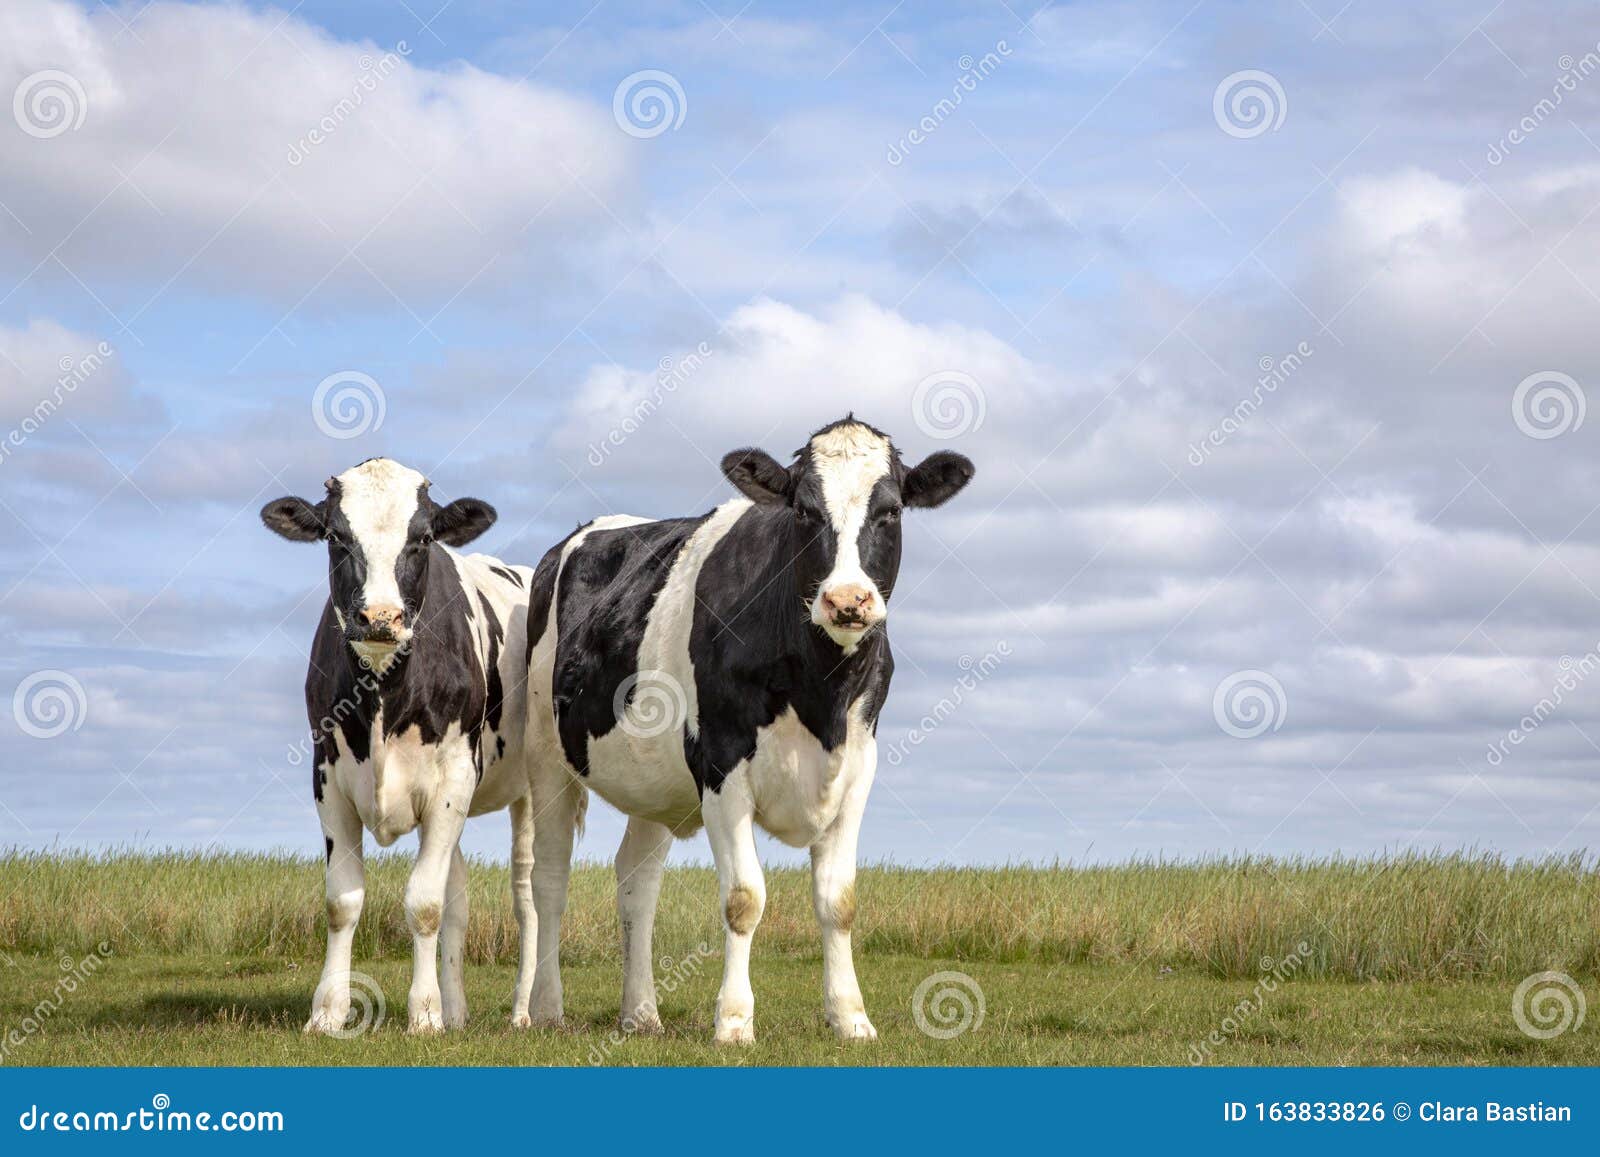 two black and white cows, friesian holstein, standing in a pasture under a blue cloudy sky and a faraway straight horizon at